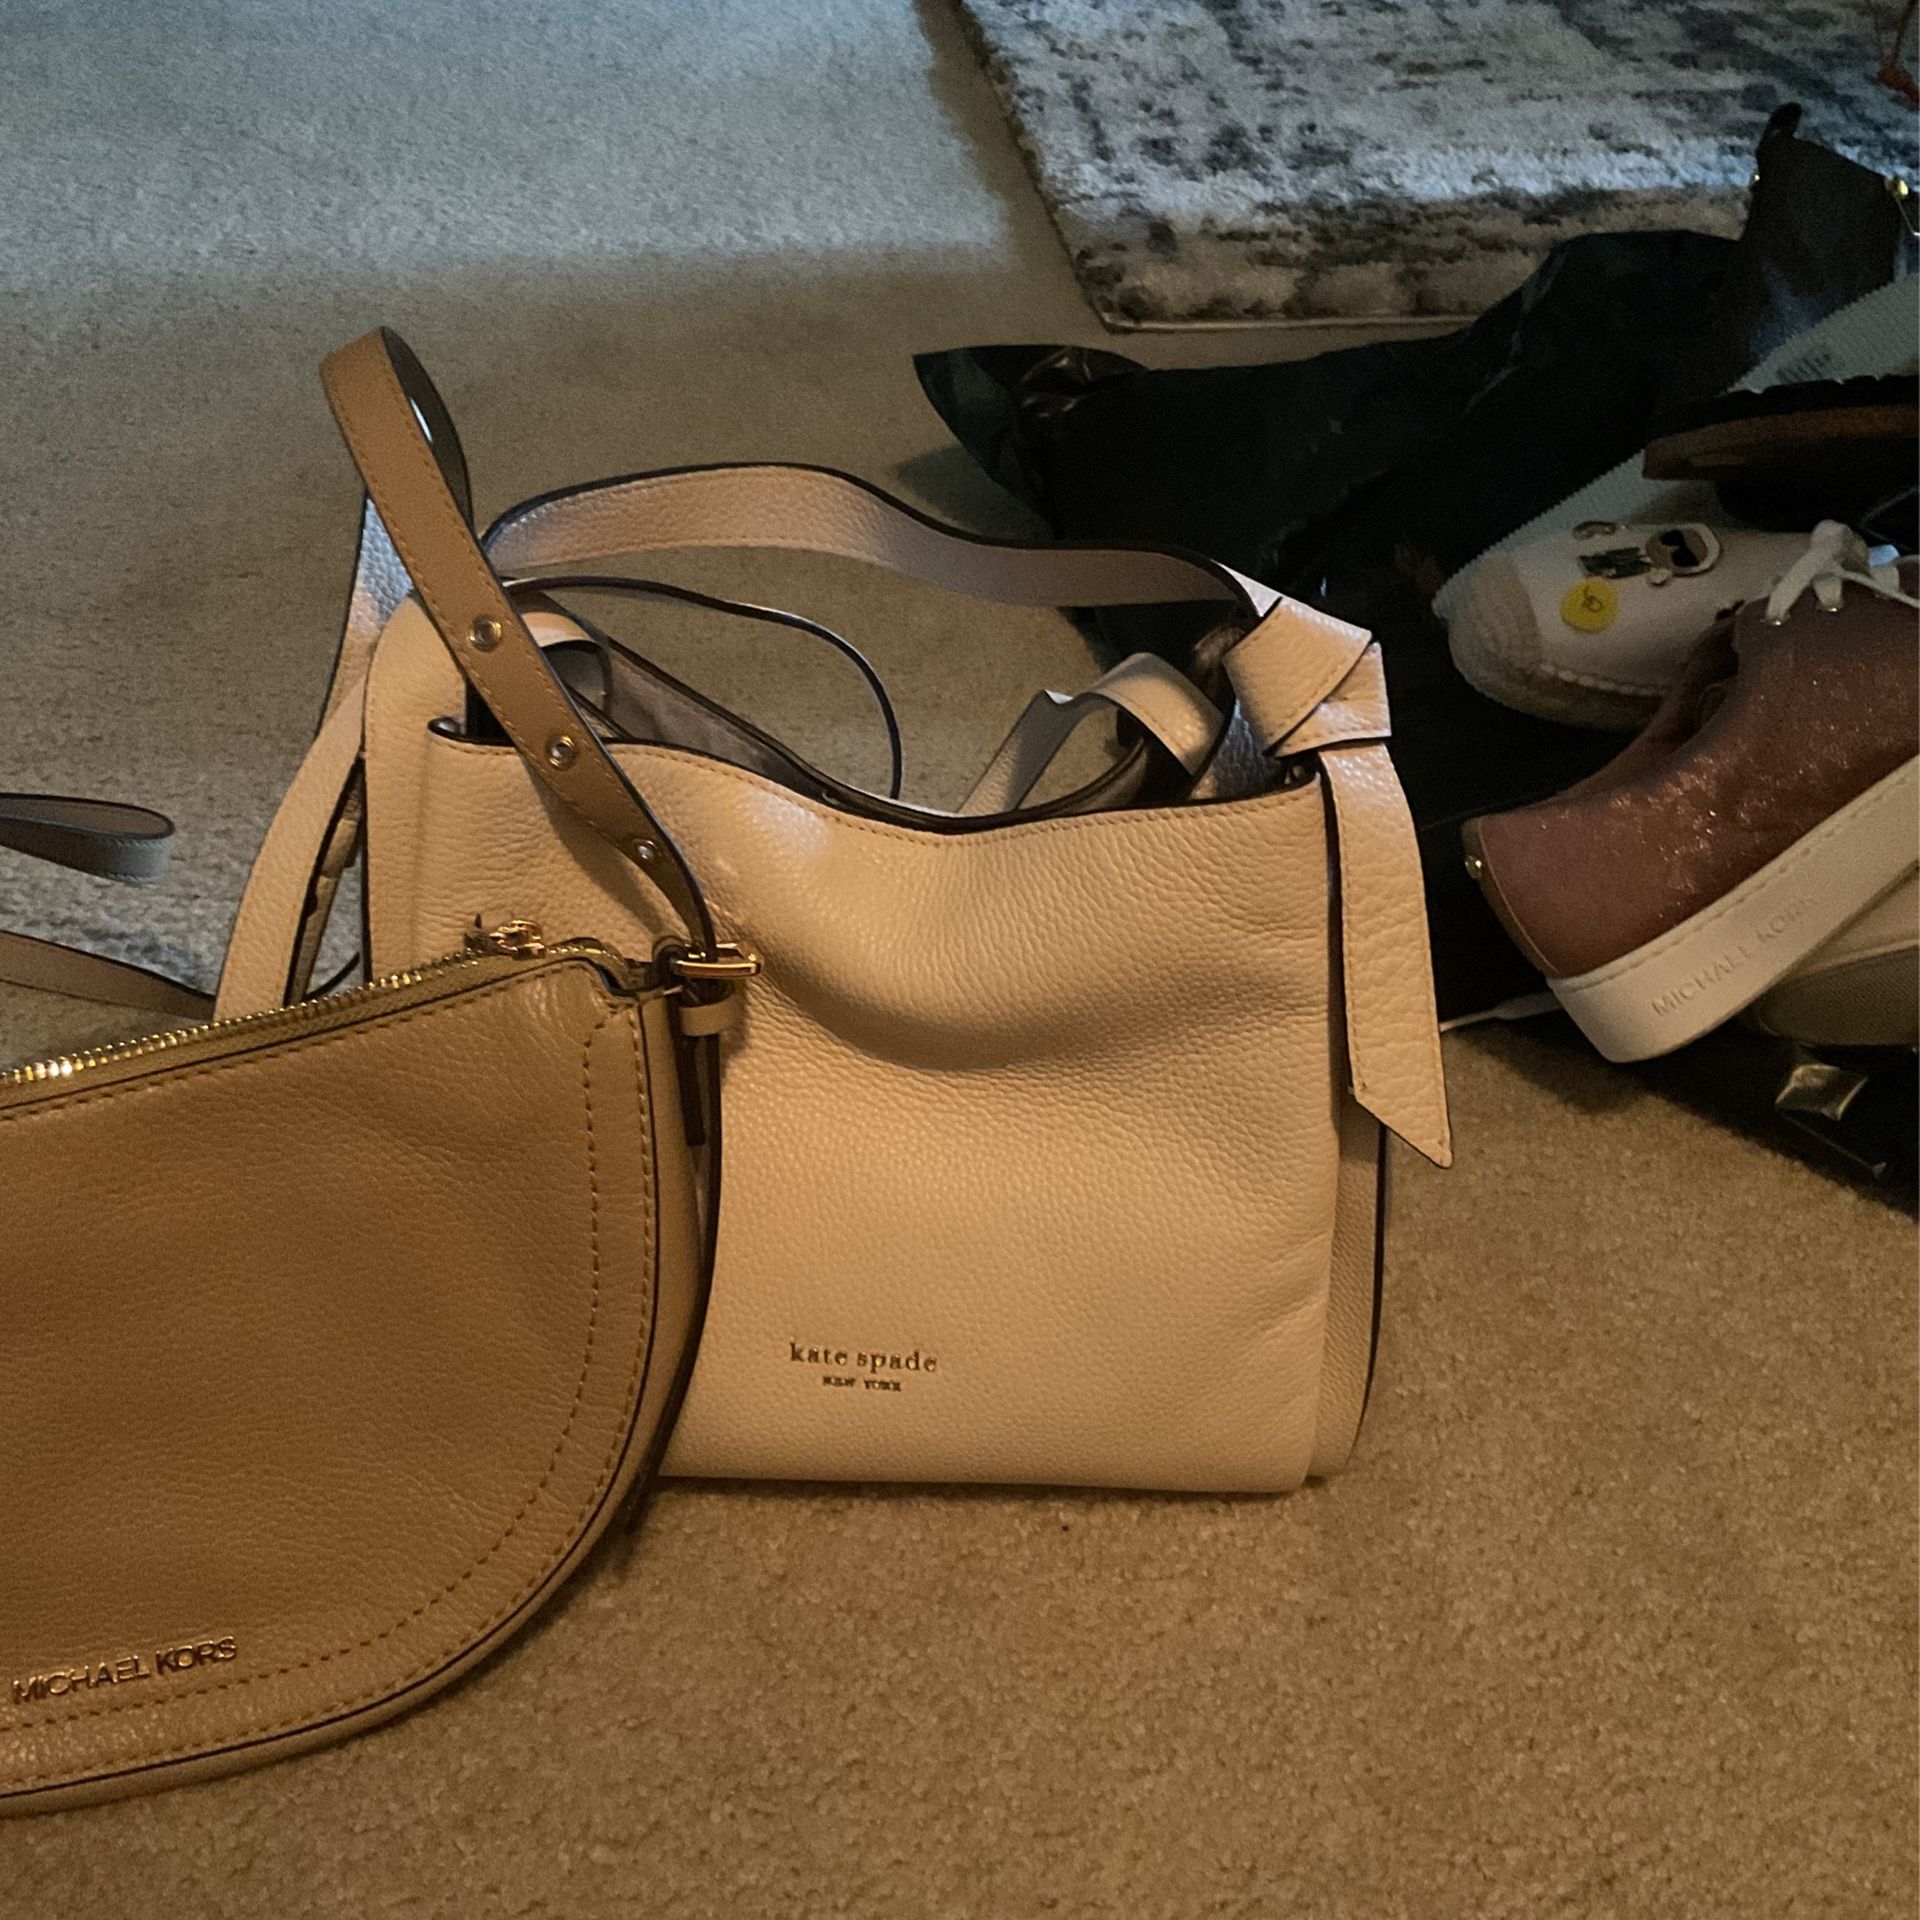 deux lux purse for Sale in Culver City, CA - OfferUp